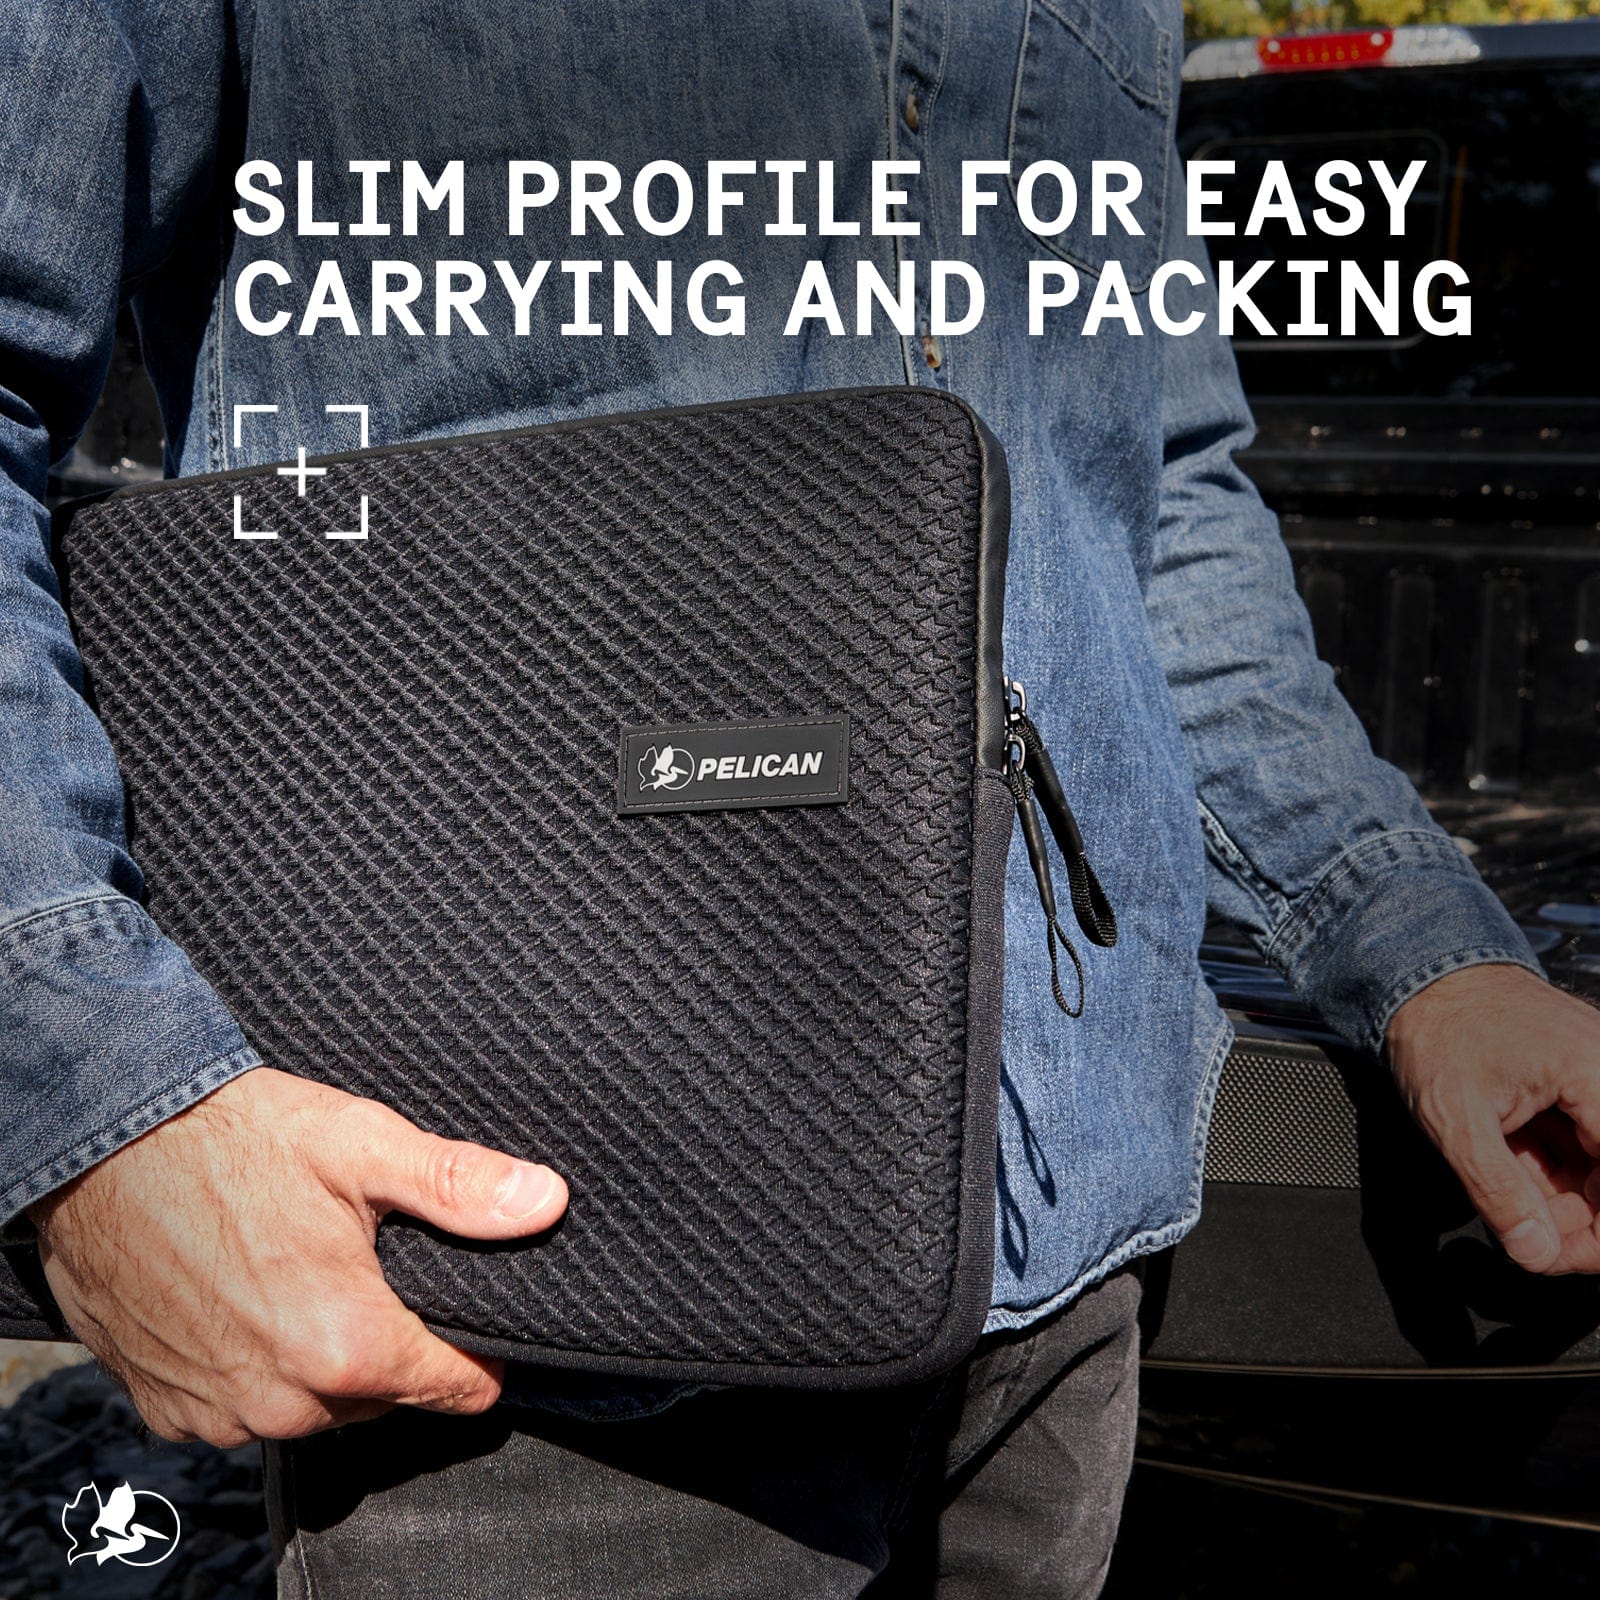 SLIM PROFILE FOR EASY CARRYING AND PACKING